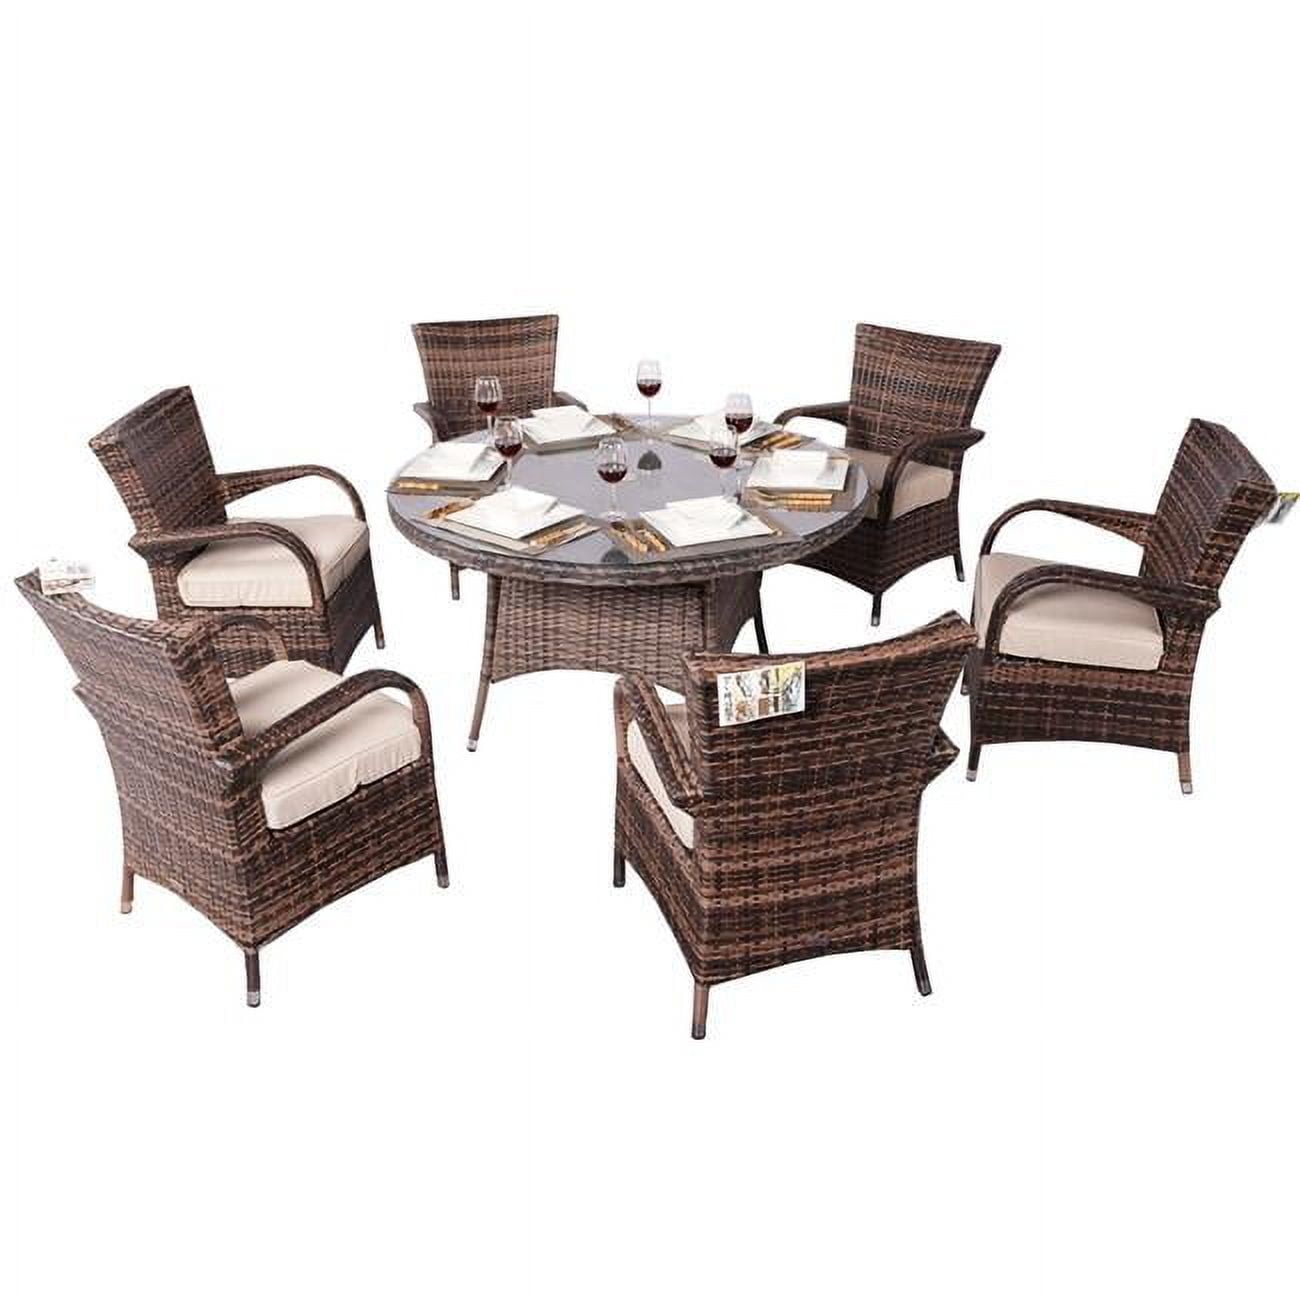 DIRECT WICKER PAD-1122-Brown Brown Wicker 7 Pieces Patio Round Table Dining Chairs Set